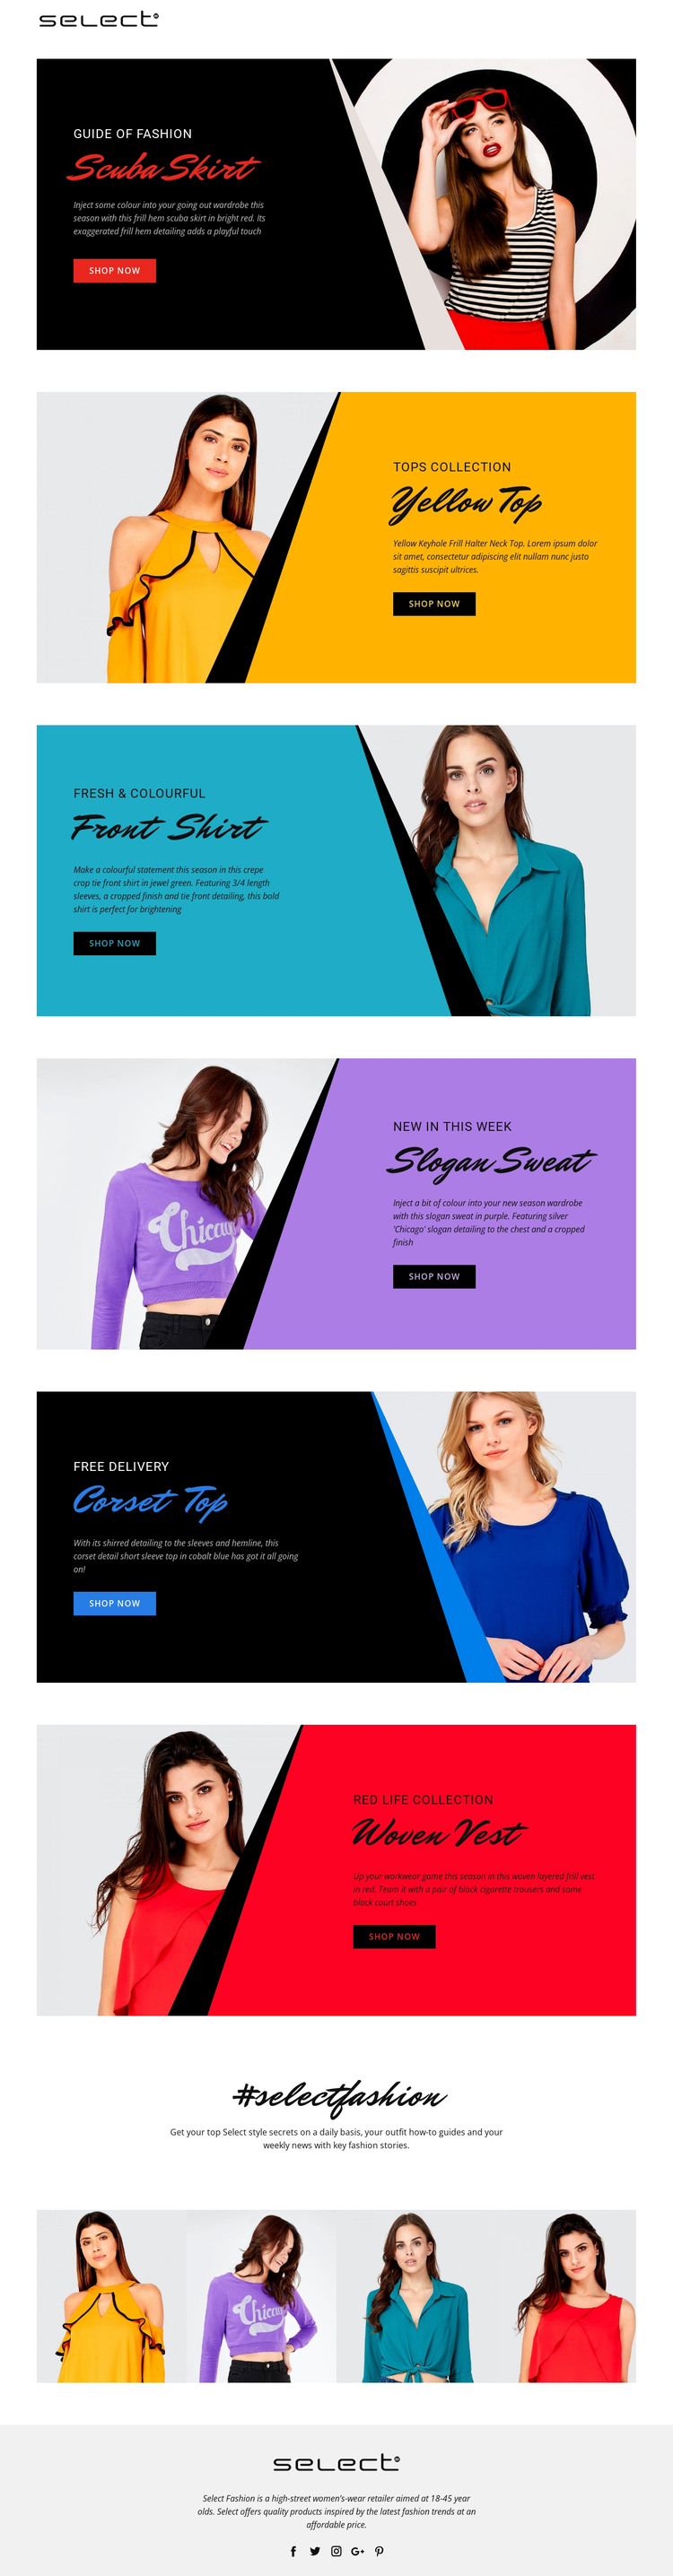 Learn about dress codes Web Design